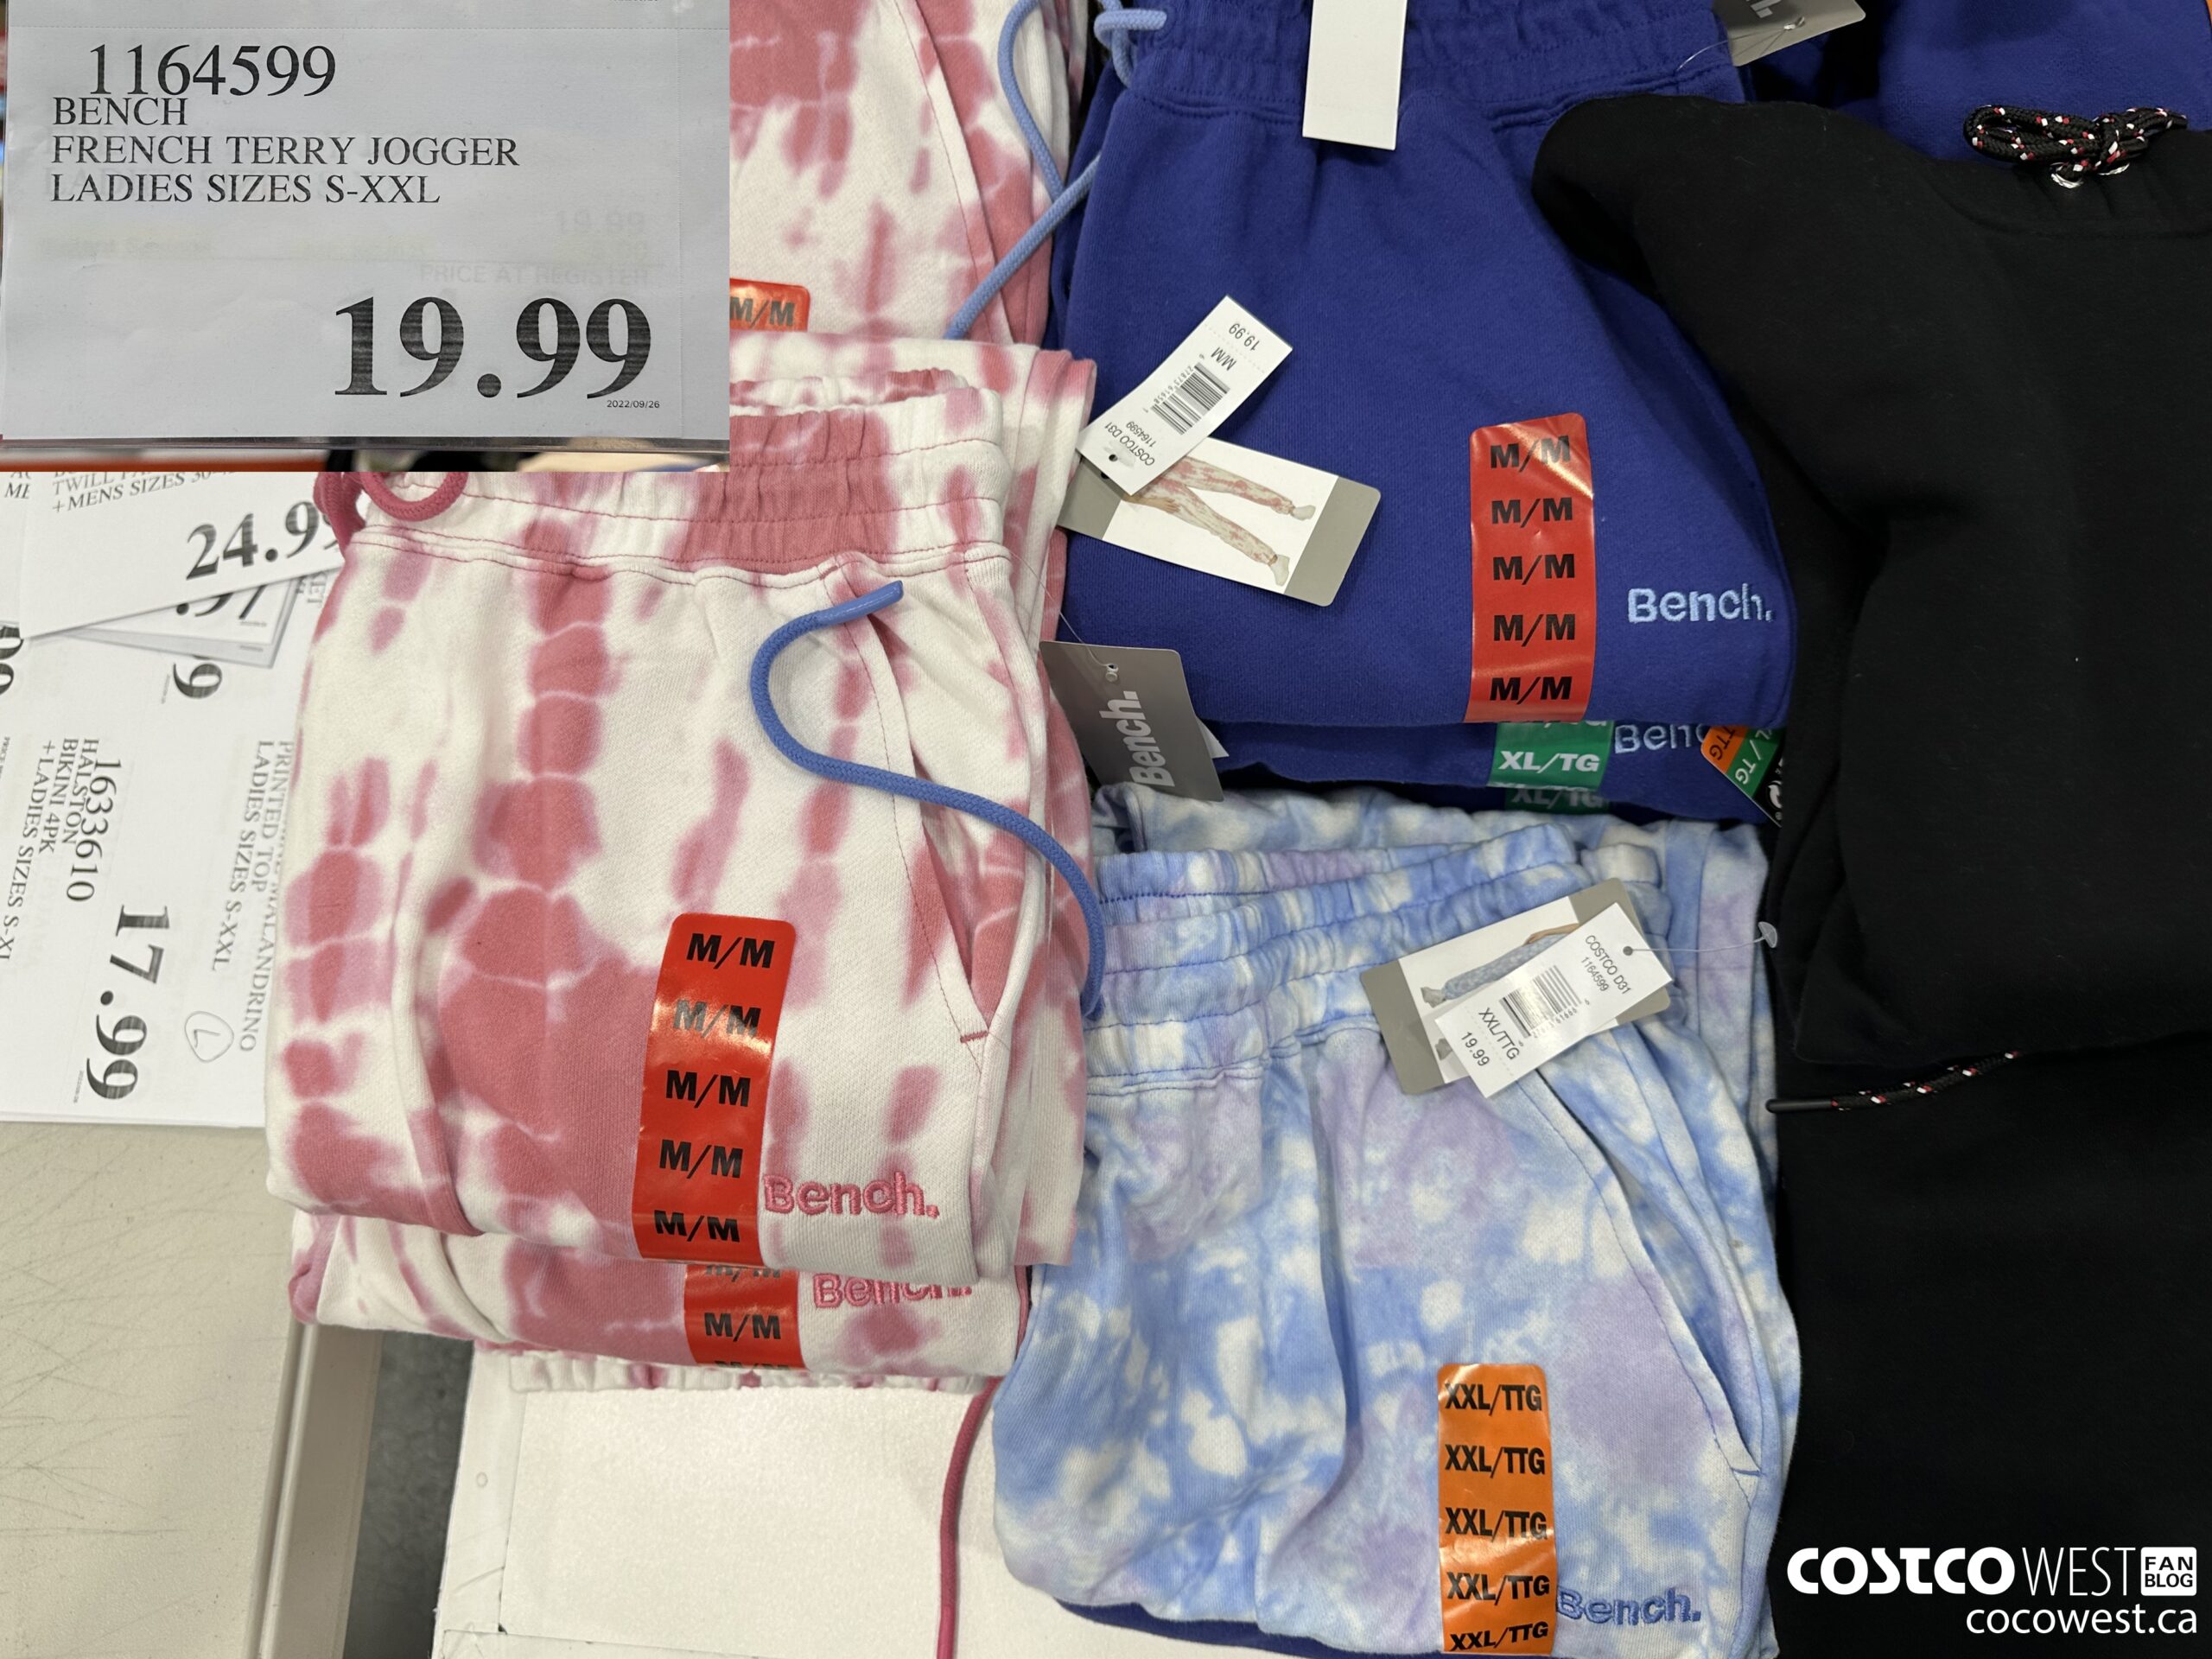 Costco Fall 2022 Superpost – The Entire Clothing Section! - Costco West Fan  Blog